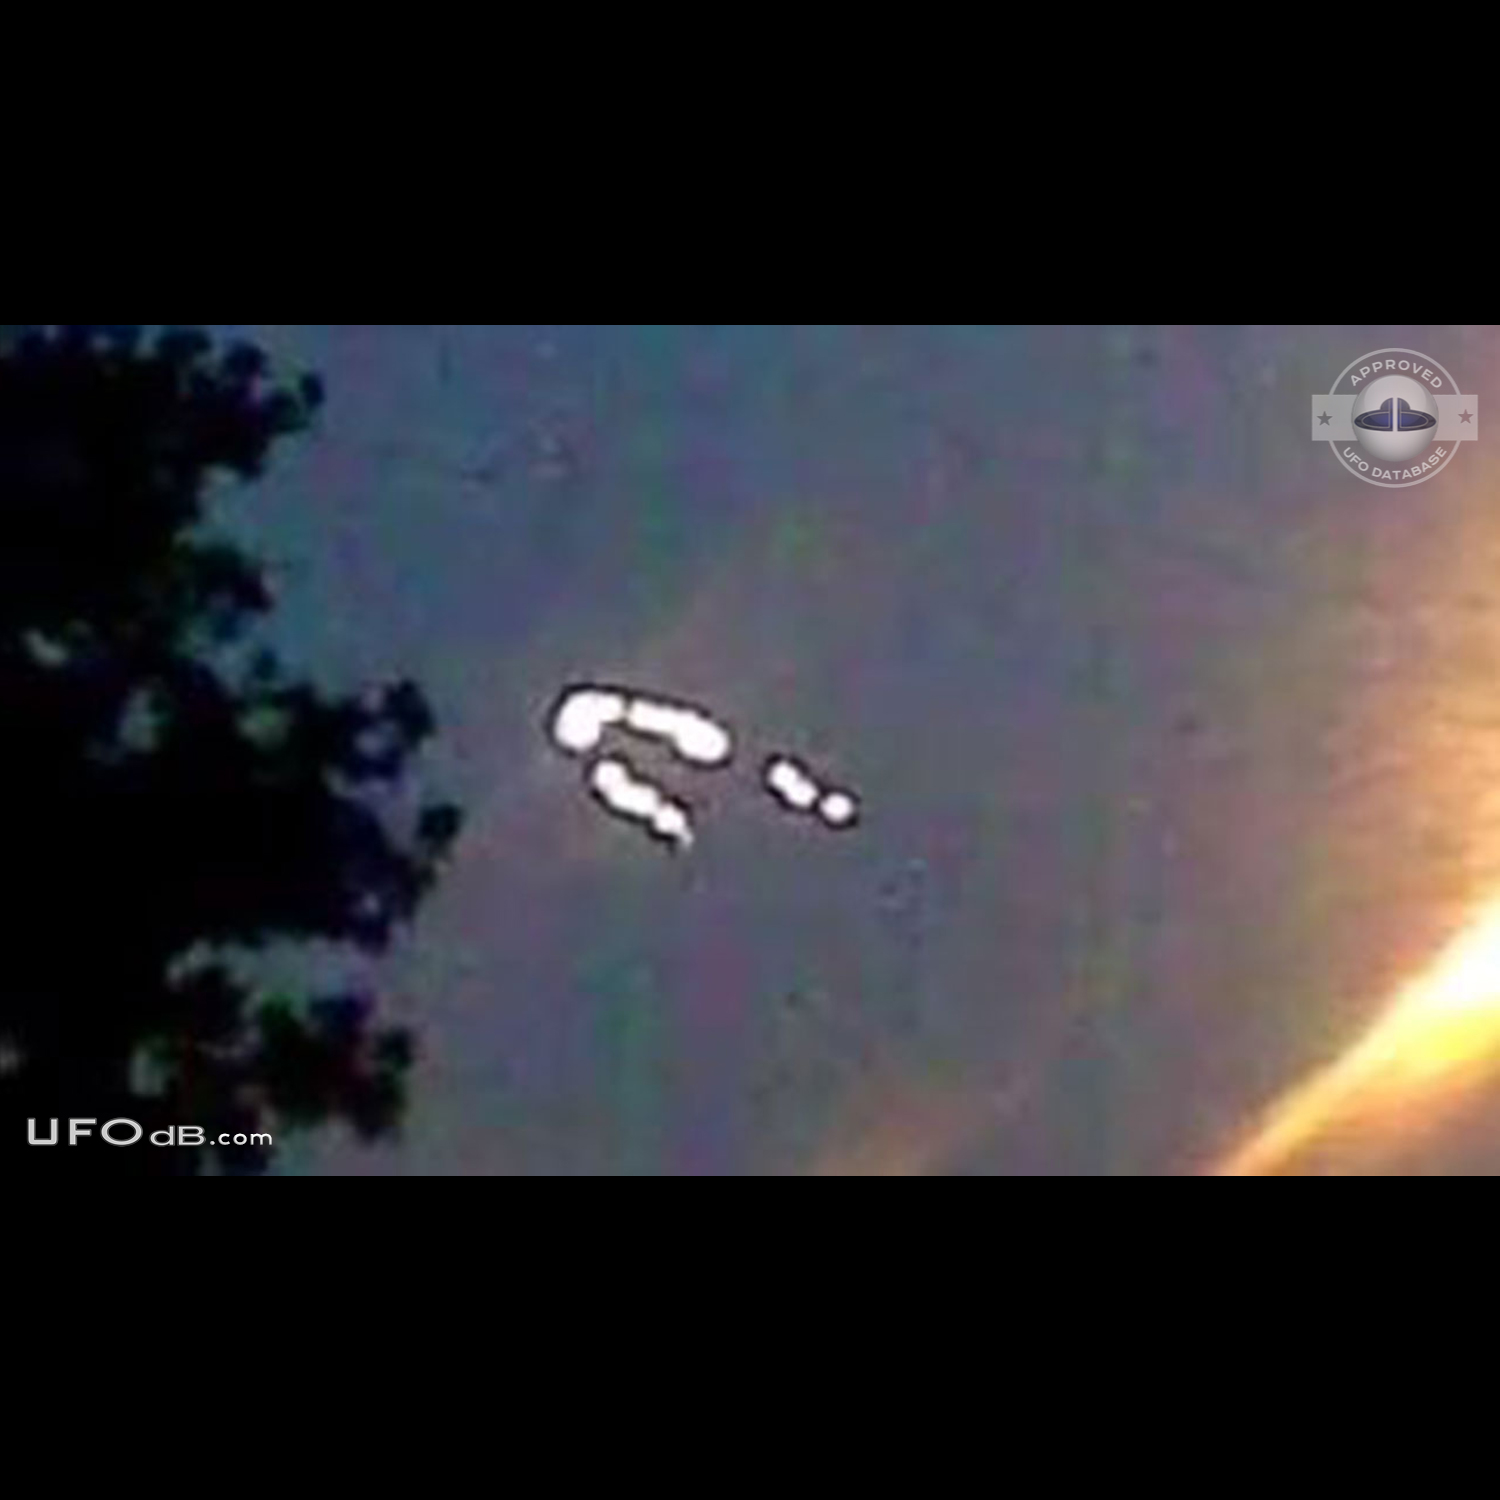 UFO with several lights caught on picture in Chandigarh, India 2009 UFO Picture #647-1